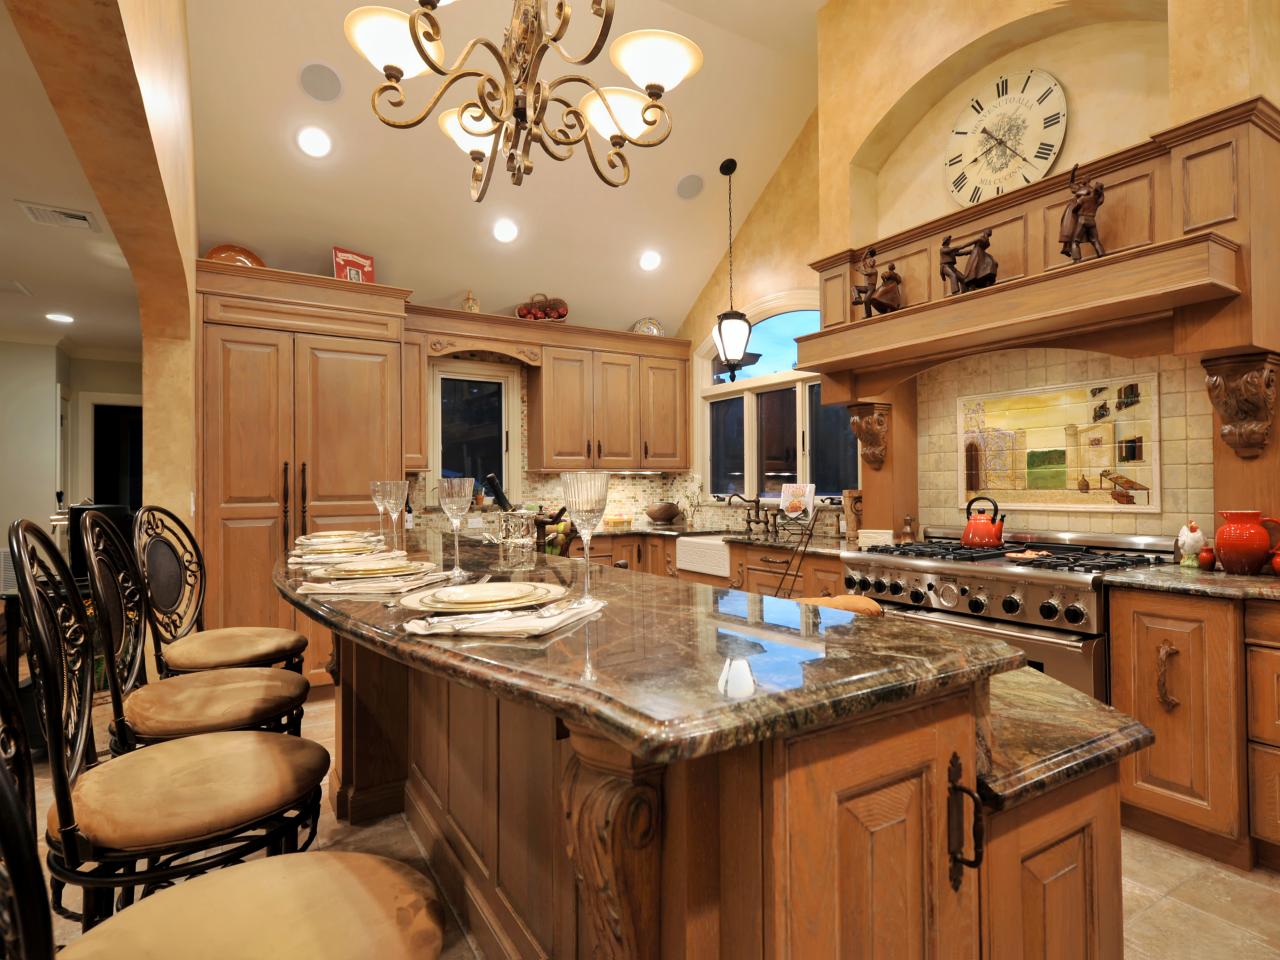 kitchen island mediterranean two tiered islands designs granite hgtv seating kitchens bar room kelly dining countertops traditional ken tier style